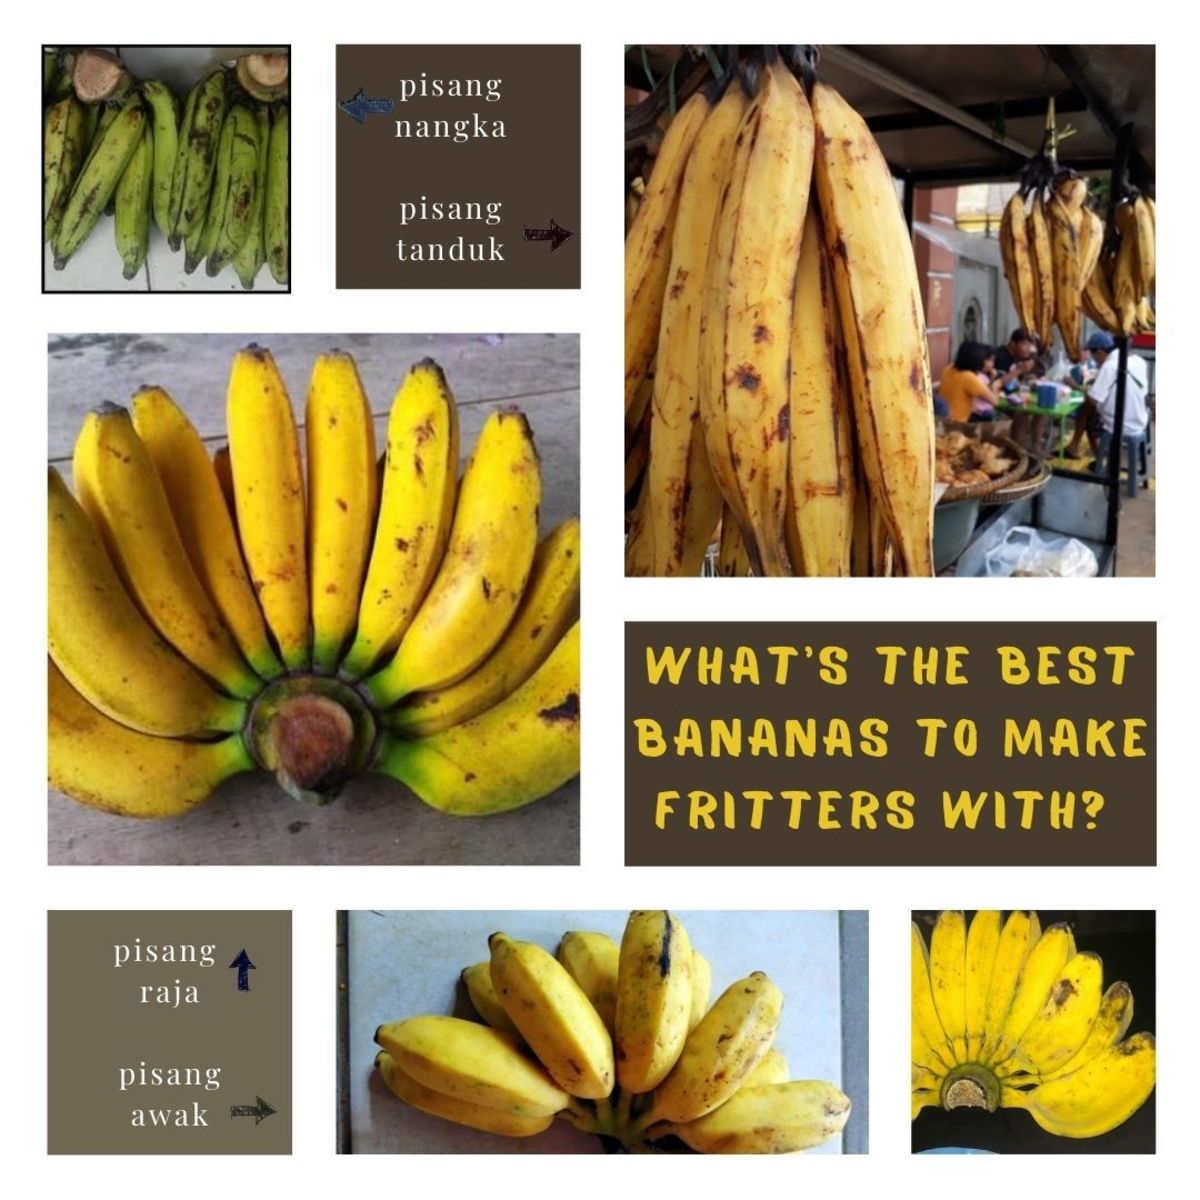 Which banana variety should you use for banana fritters?